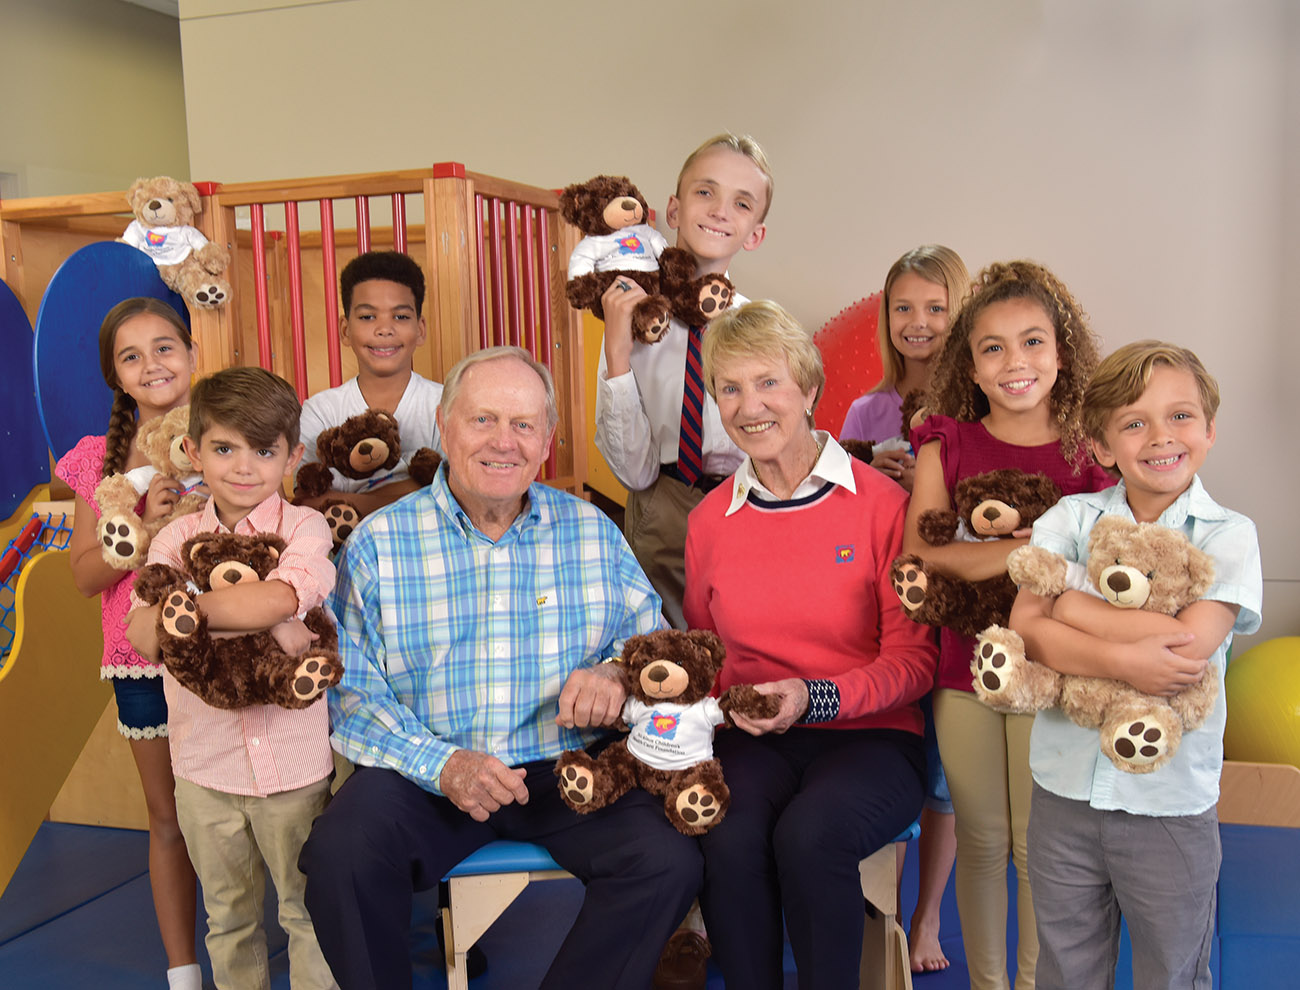 Children Win! Thanks to Jack and Barbara Nicklaus and the Cognizant Classic